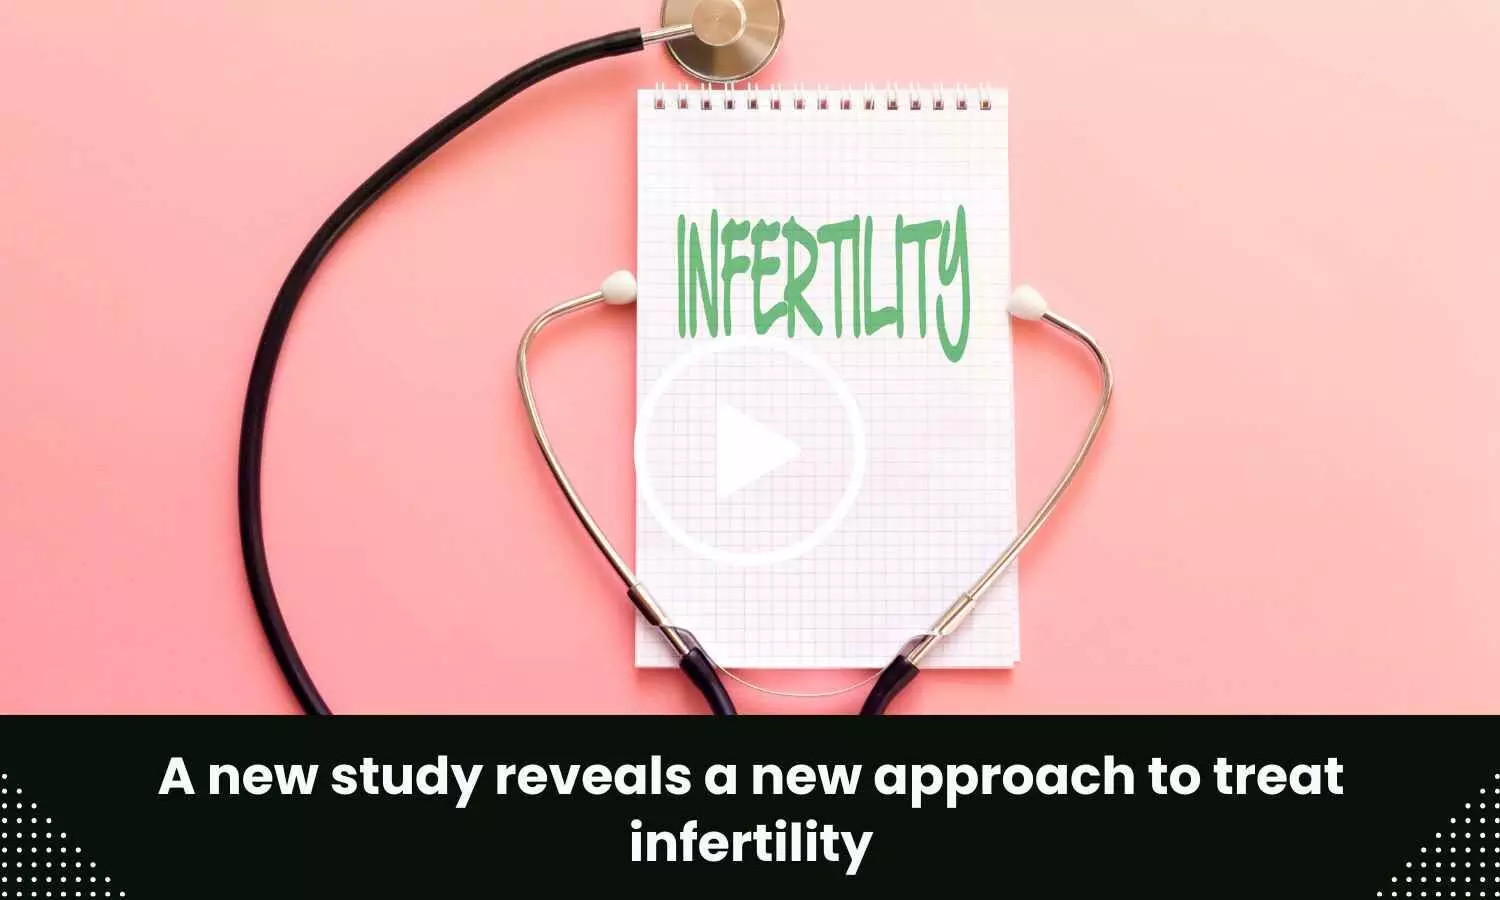 A new study reveals a new approach to treat infertility